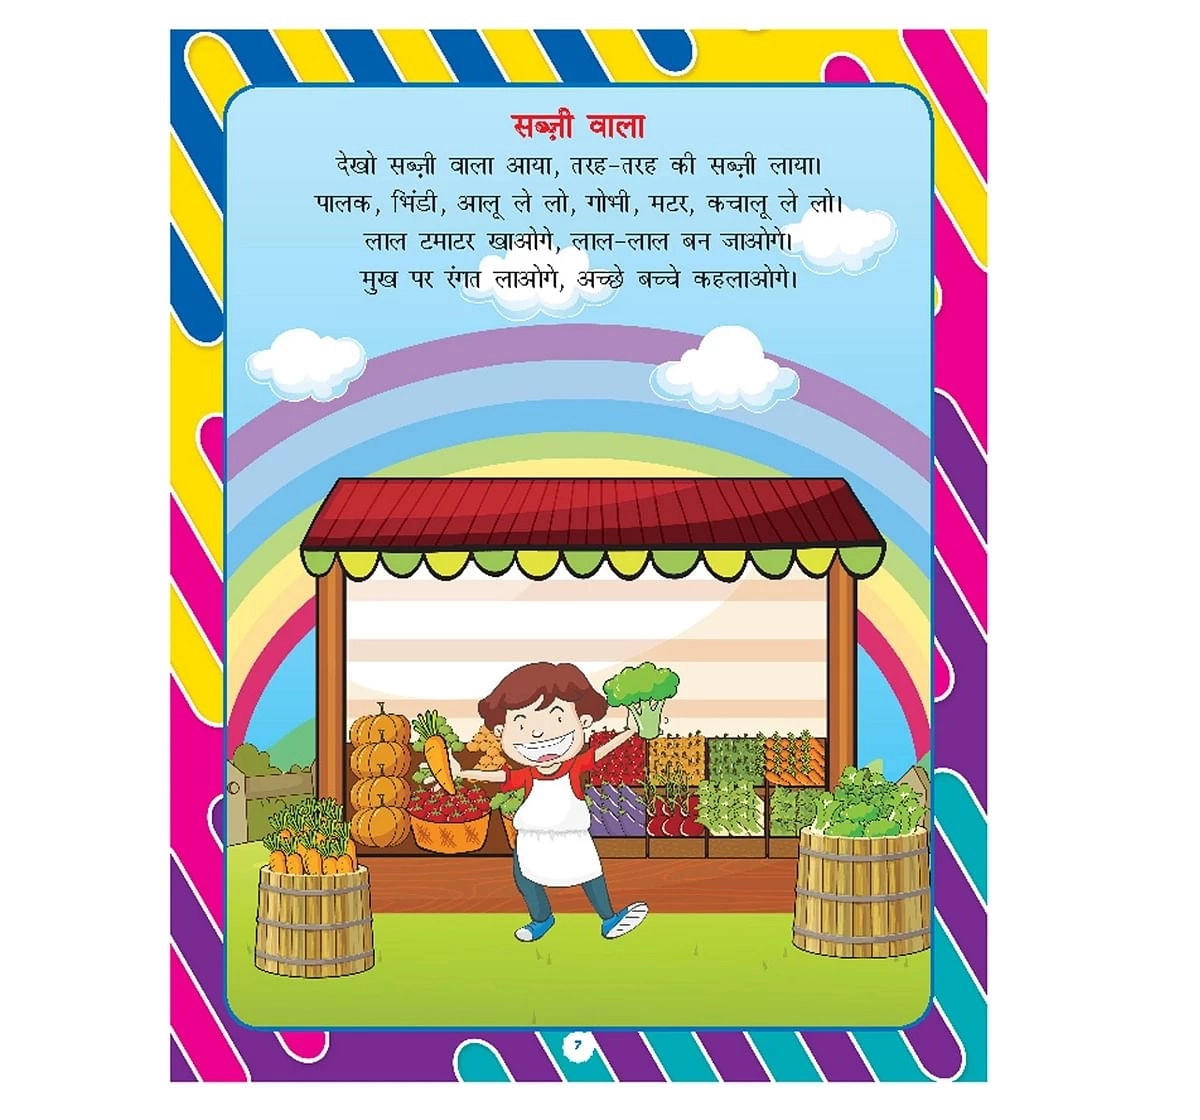 Dreamland Paper Back Kindergarten bal Geet and Story Book for kids 4Y+, Multicolour